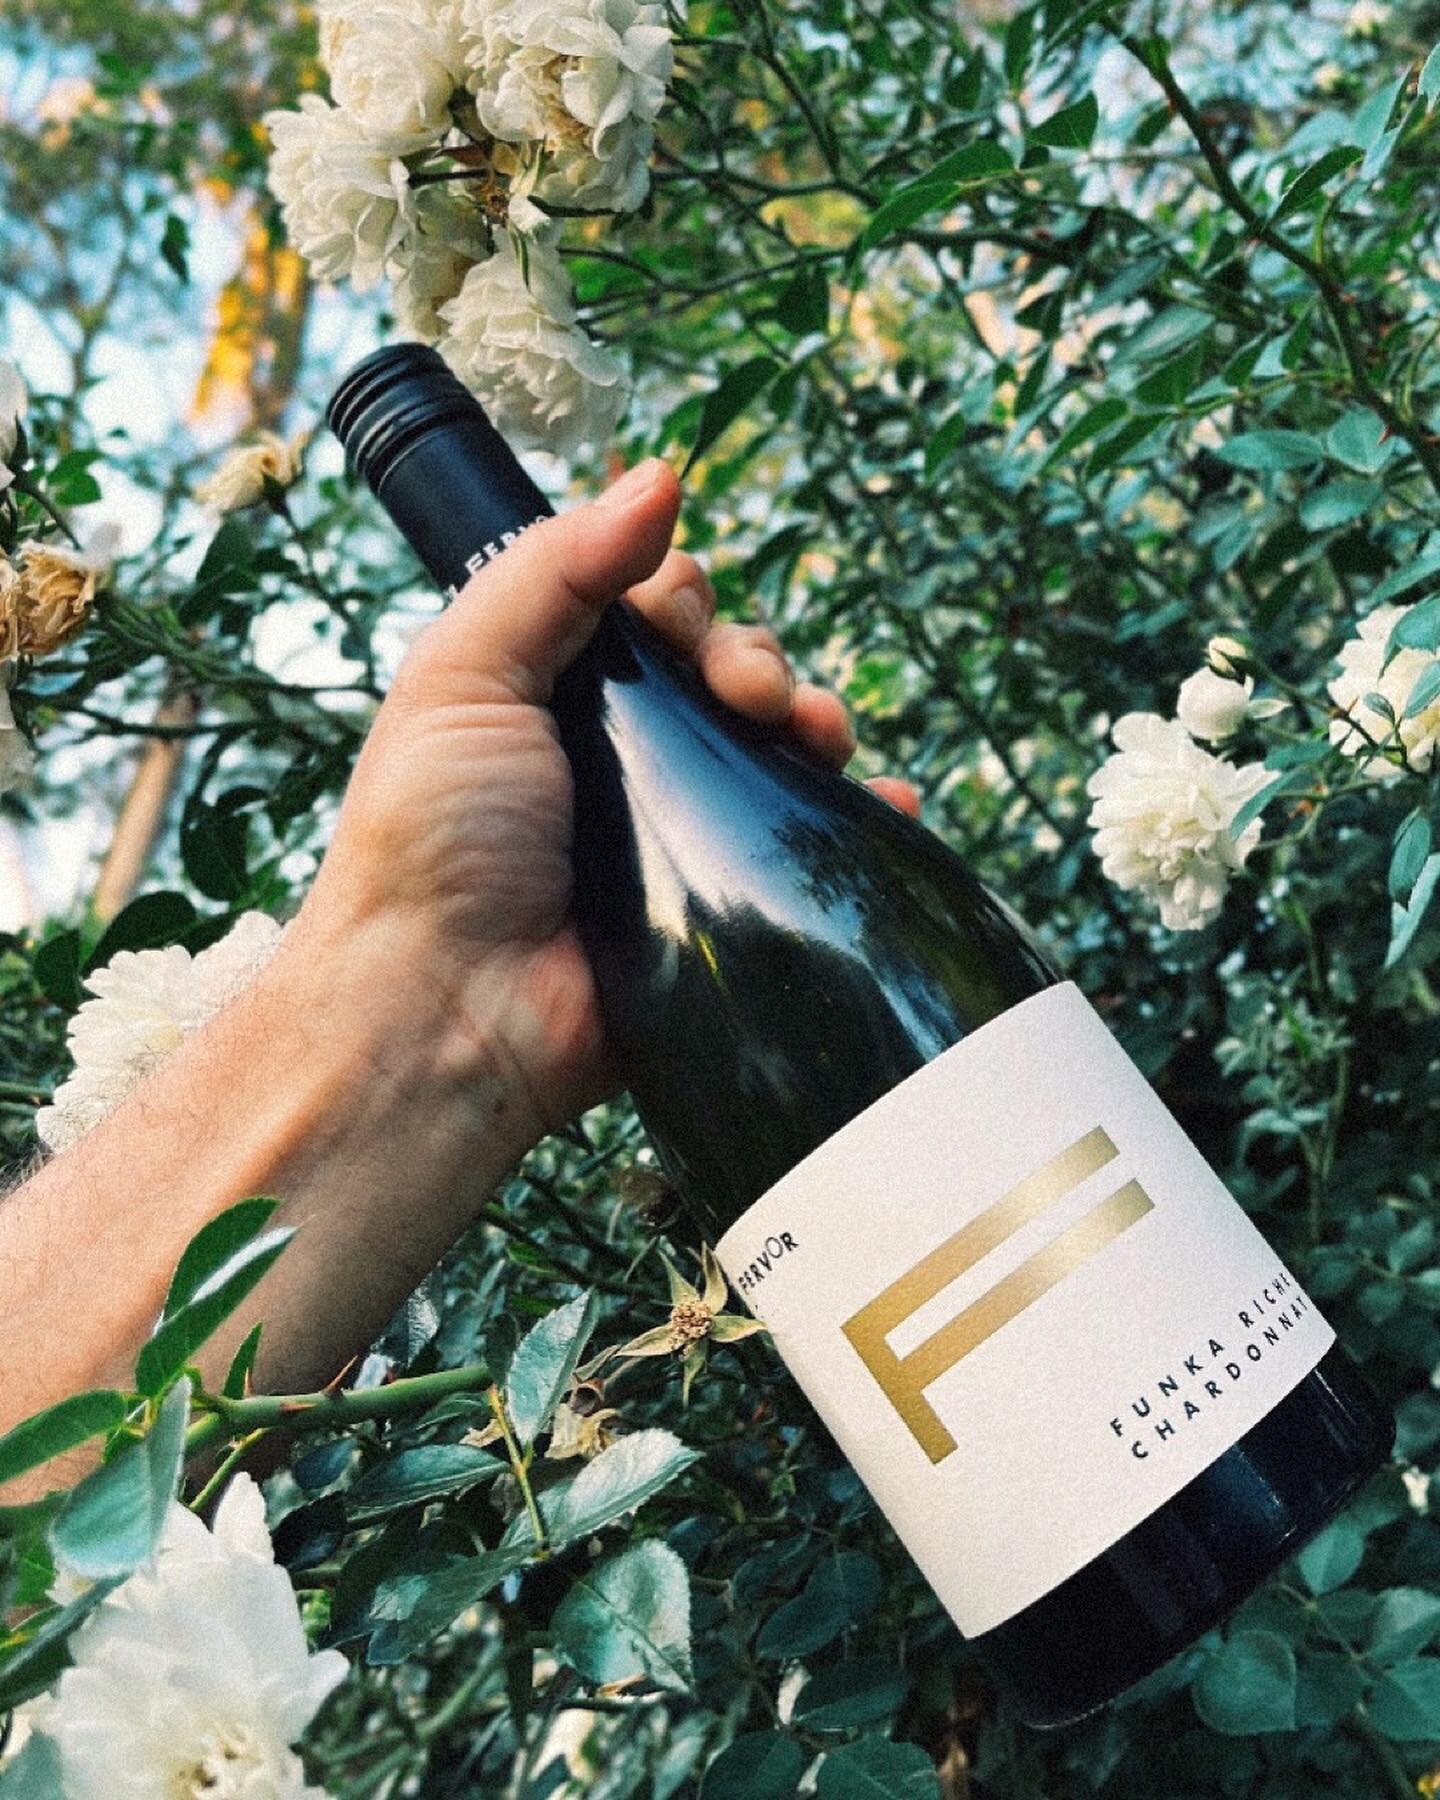 Our latest release, 2023 Funka Riche - Chardonnay

So, what do you need to know?
Wild, funky notes surround a core of ripe stonefruit and touches of cashew and gunflint.

Balanced, Textural, Complex.

Drink now, or cellar it for 10+ years

Find it on